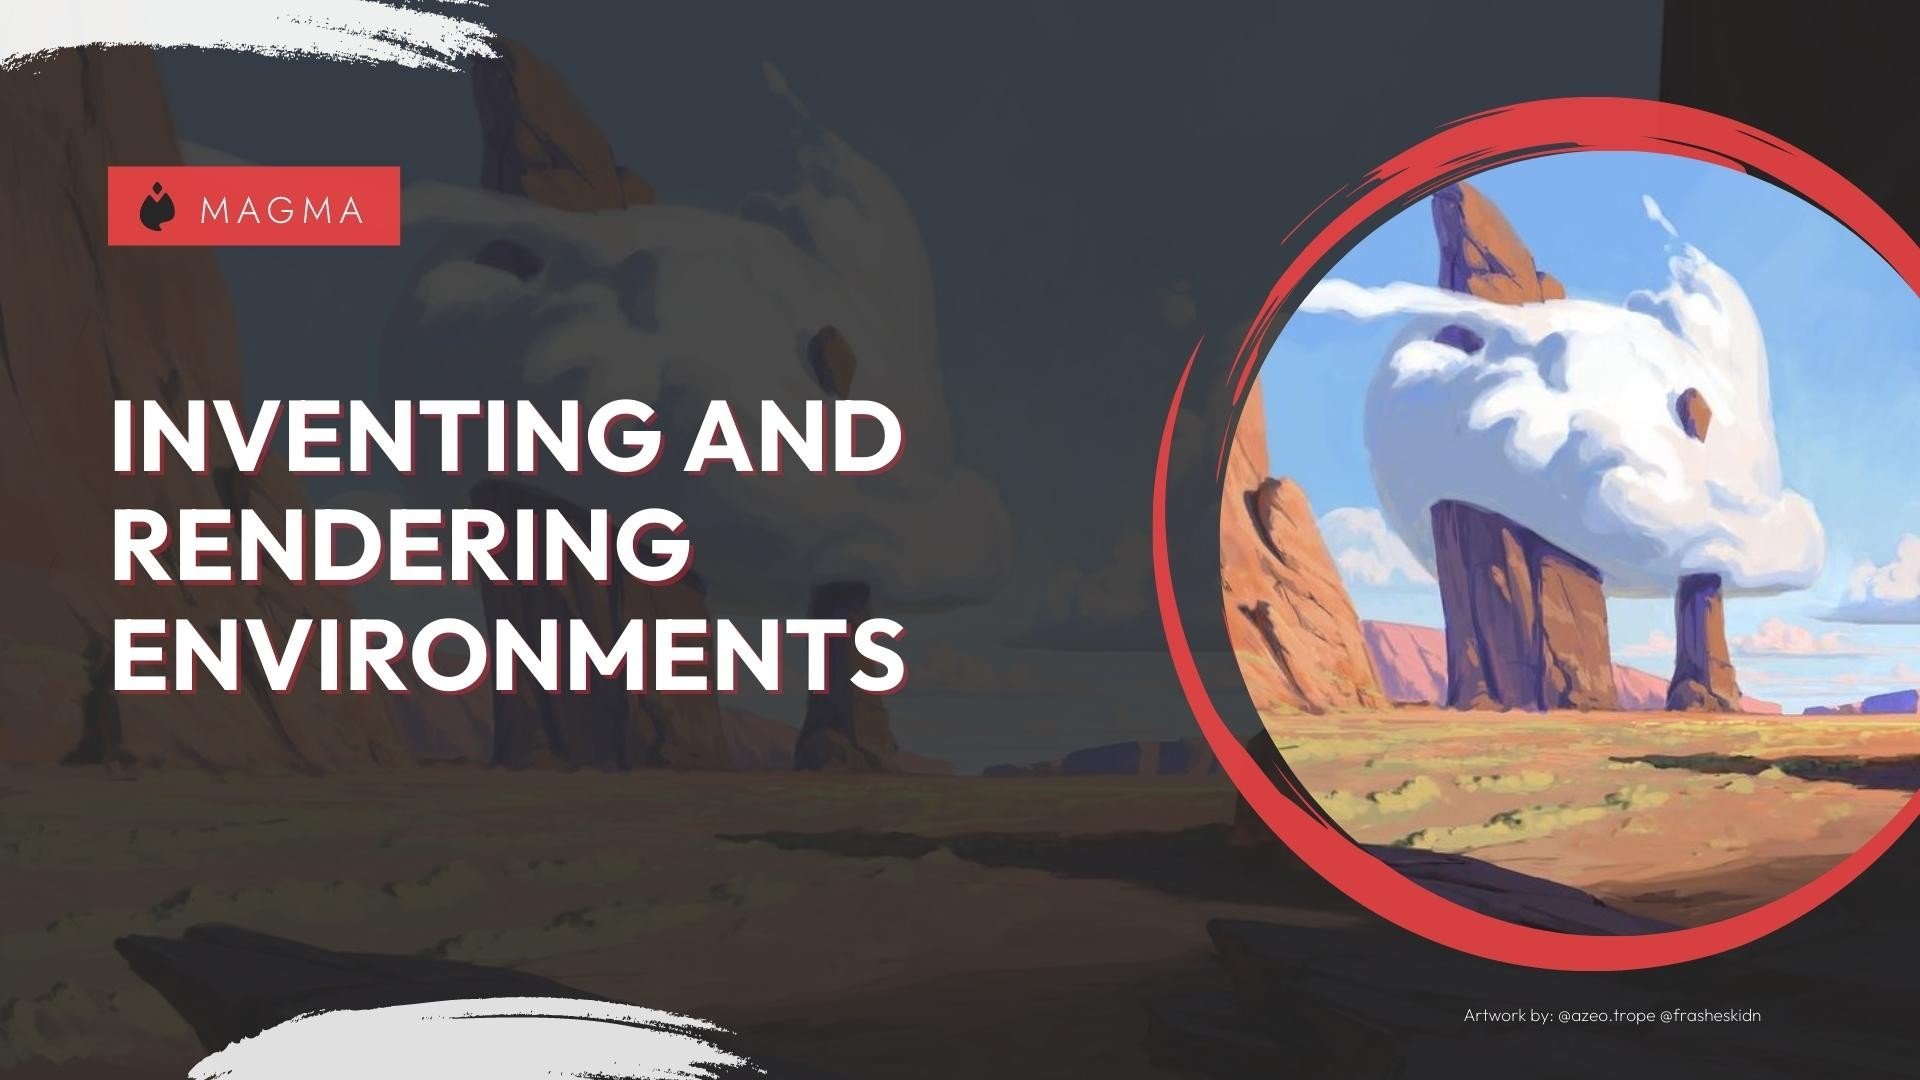 Inventing and rendering environments cover image